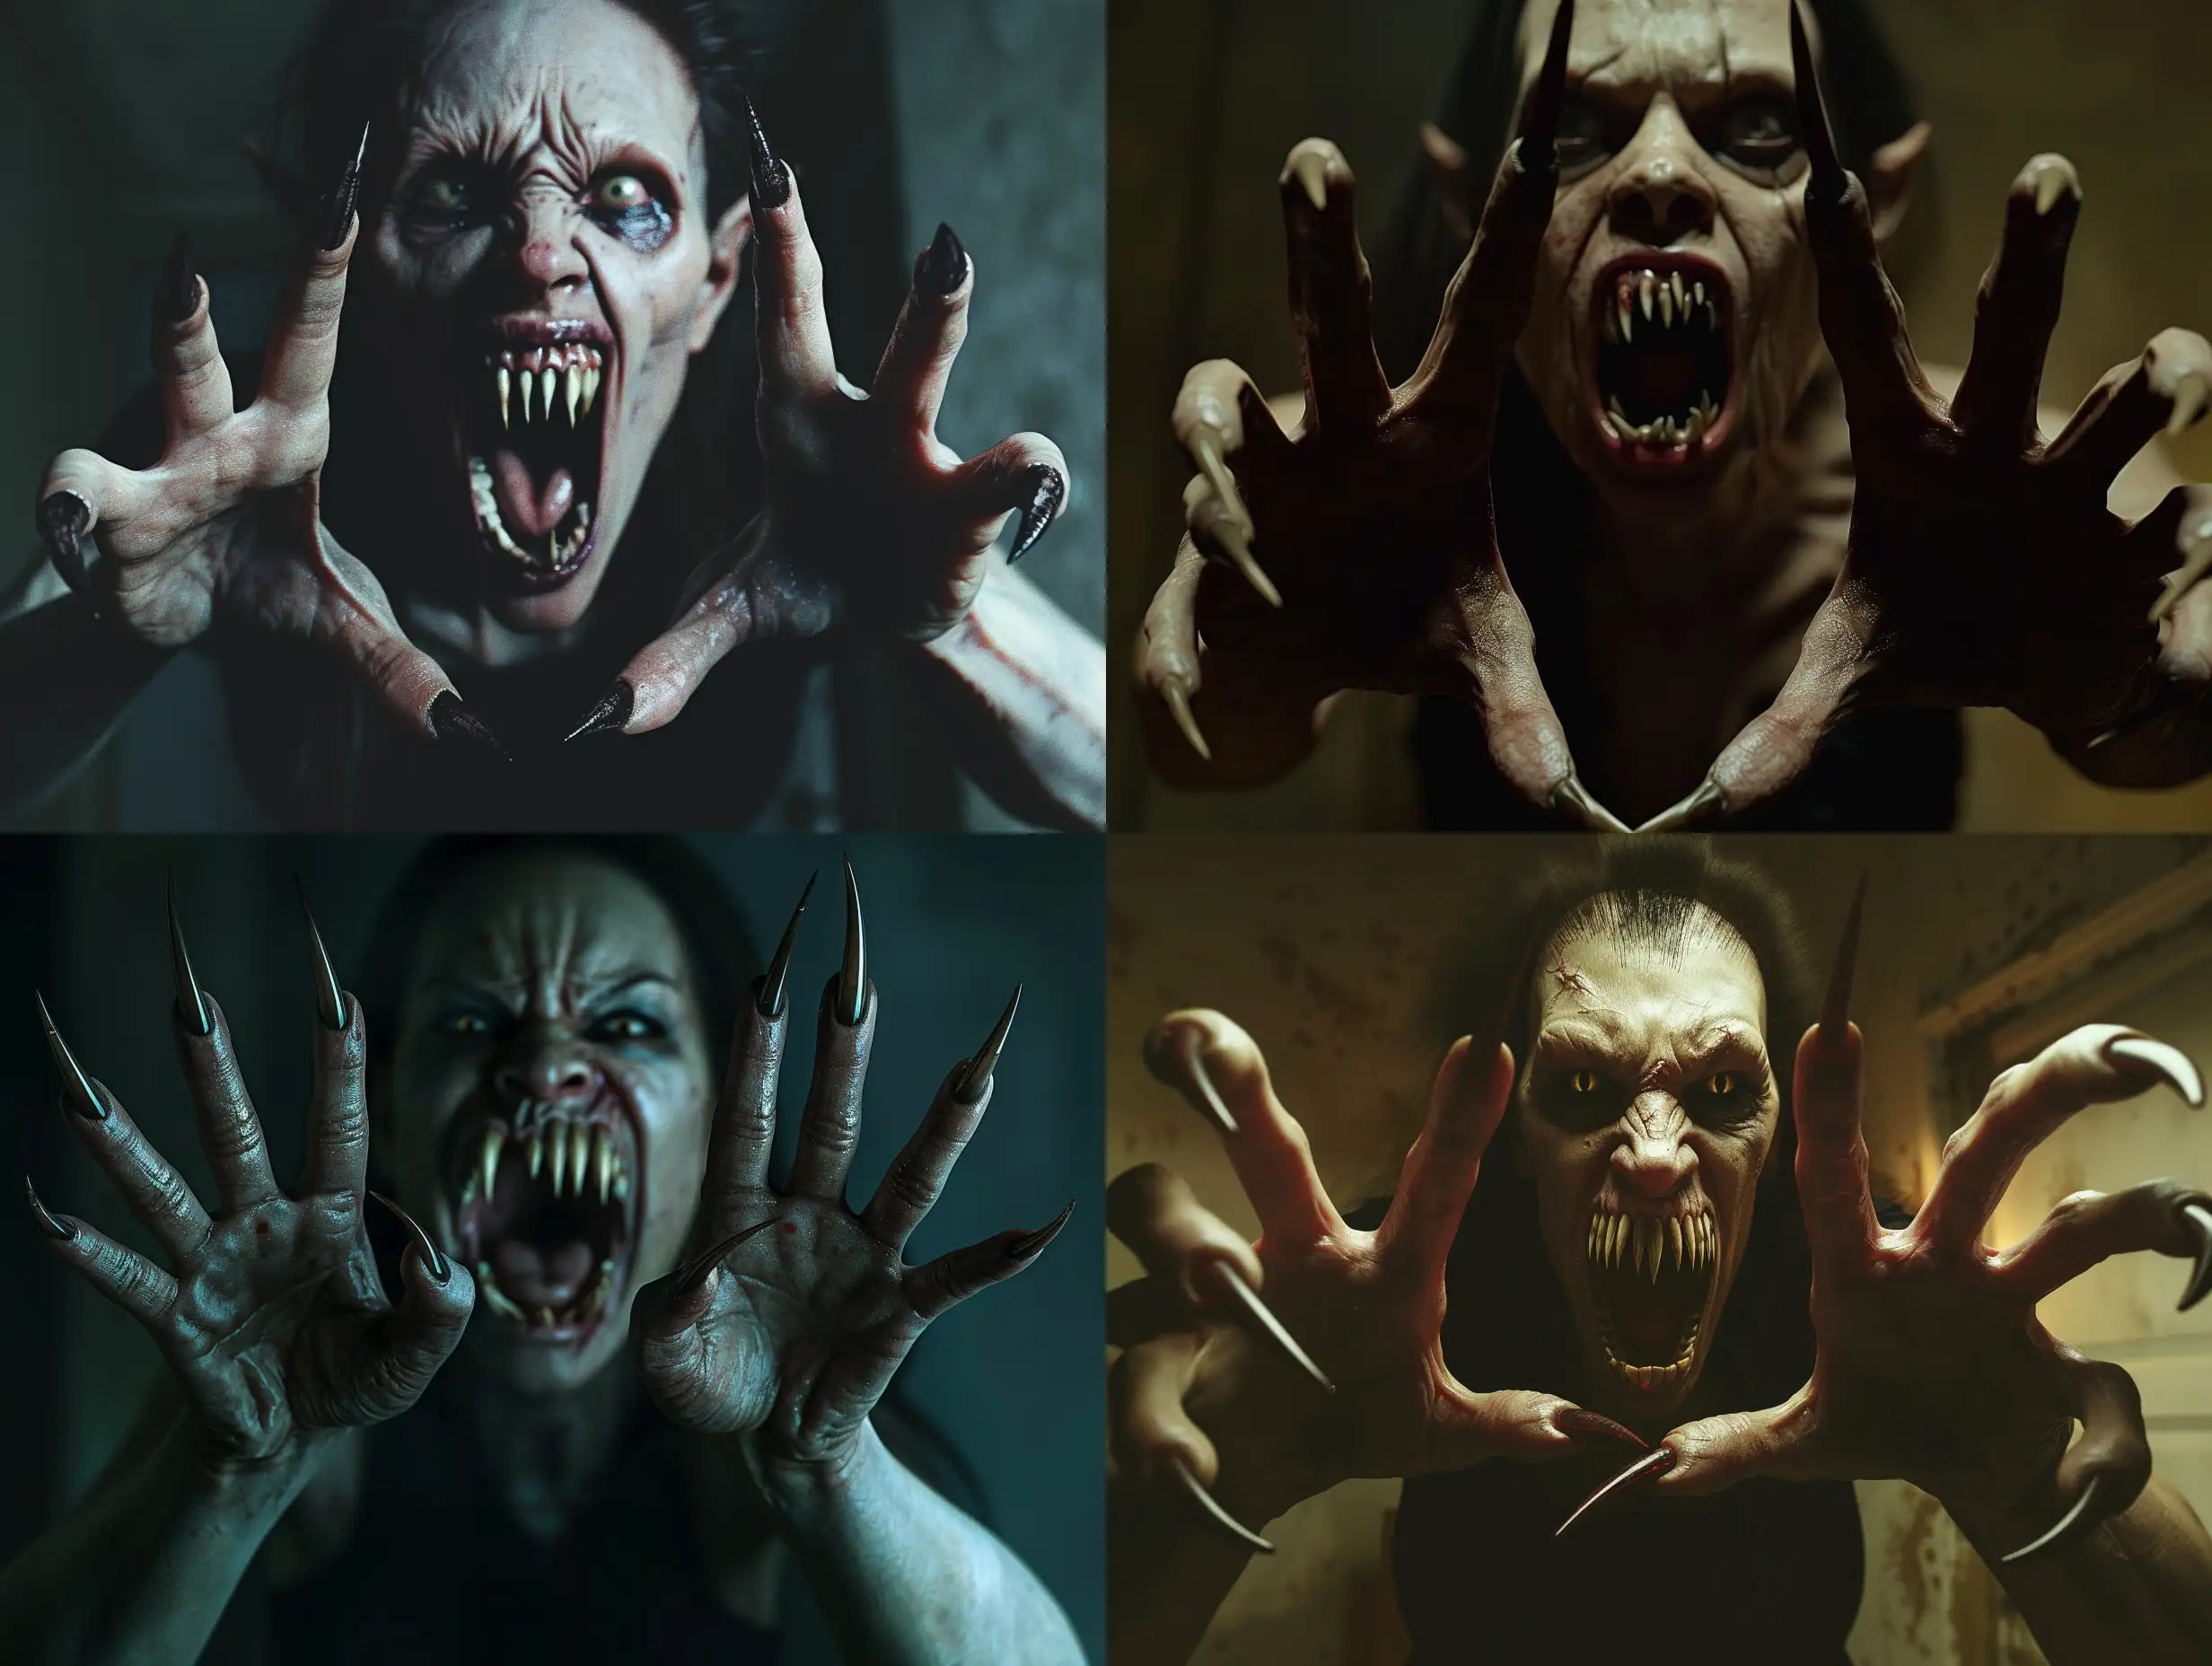 A photorealistic scene of a wild ugly monstruos vampire woman with  extra long pointed fingernails, on each hands with five fingers, her mouth is threateningly open, and terrible teeth look like fangs, the vampire looks like she climbed out of the grave, her nails resemble the claws of a predators.scene inside darkness room,hyper-realism, cinematic, high detail, photo detailing, high quality, photorealistic, aggressive, dark atmosphere, realistic, the smallest details, detailed nails, horror, atmospheric lighting, full anatomical, photorealism, detailed, textured, dark, haunting, night-time scene, intense, creepy, undead, spooky, eerie, atmospheric lighting, nightmare, grotesque, terrifying, realistic anatomy, human hands, very clear without flaws with five fingers.